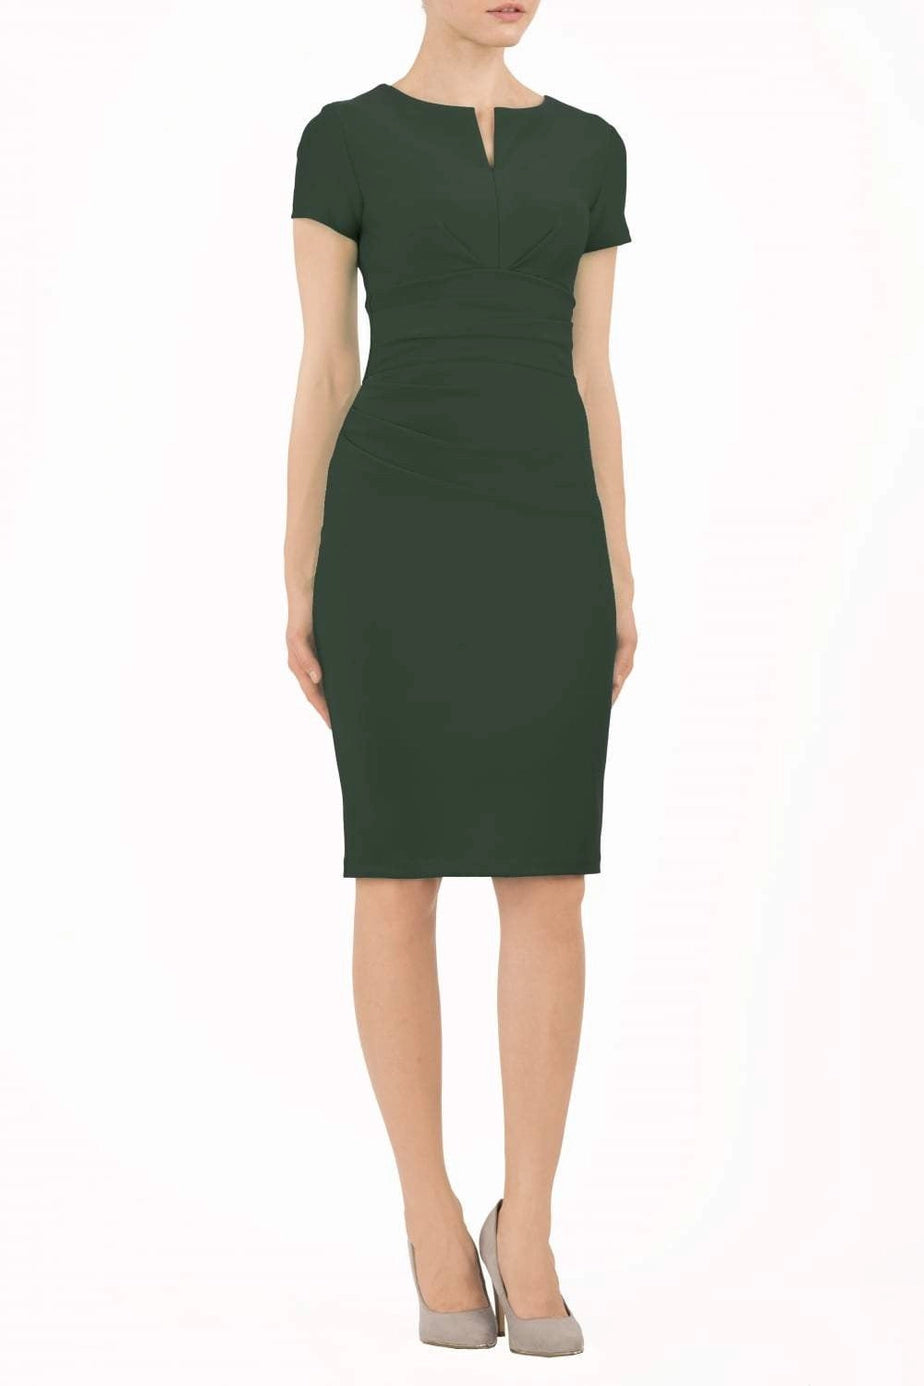 Women' Business Donna Dress - Forest Green NORA GARDNER | OFFICIAL STORE for work and office